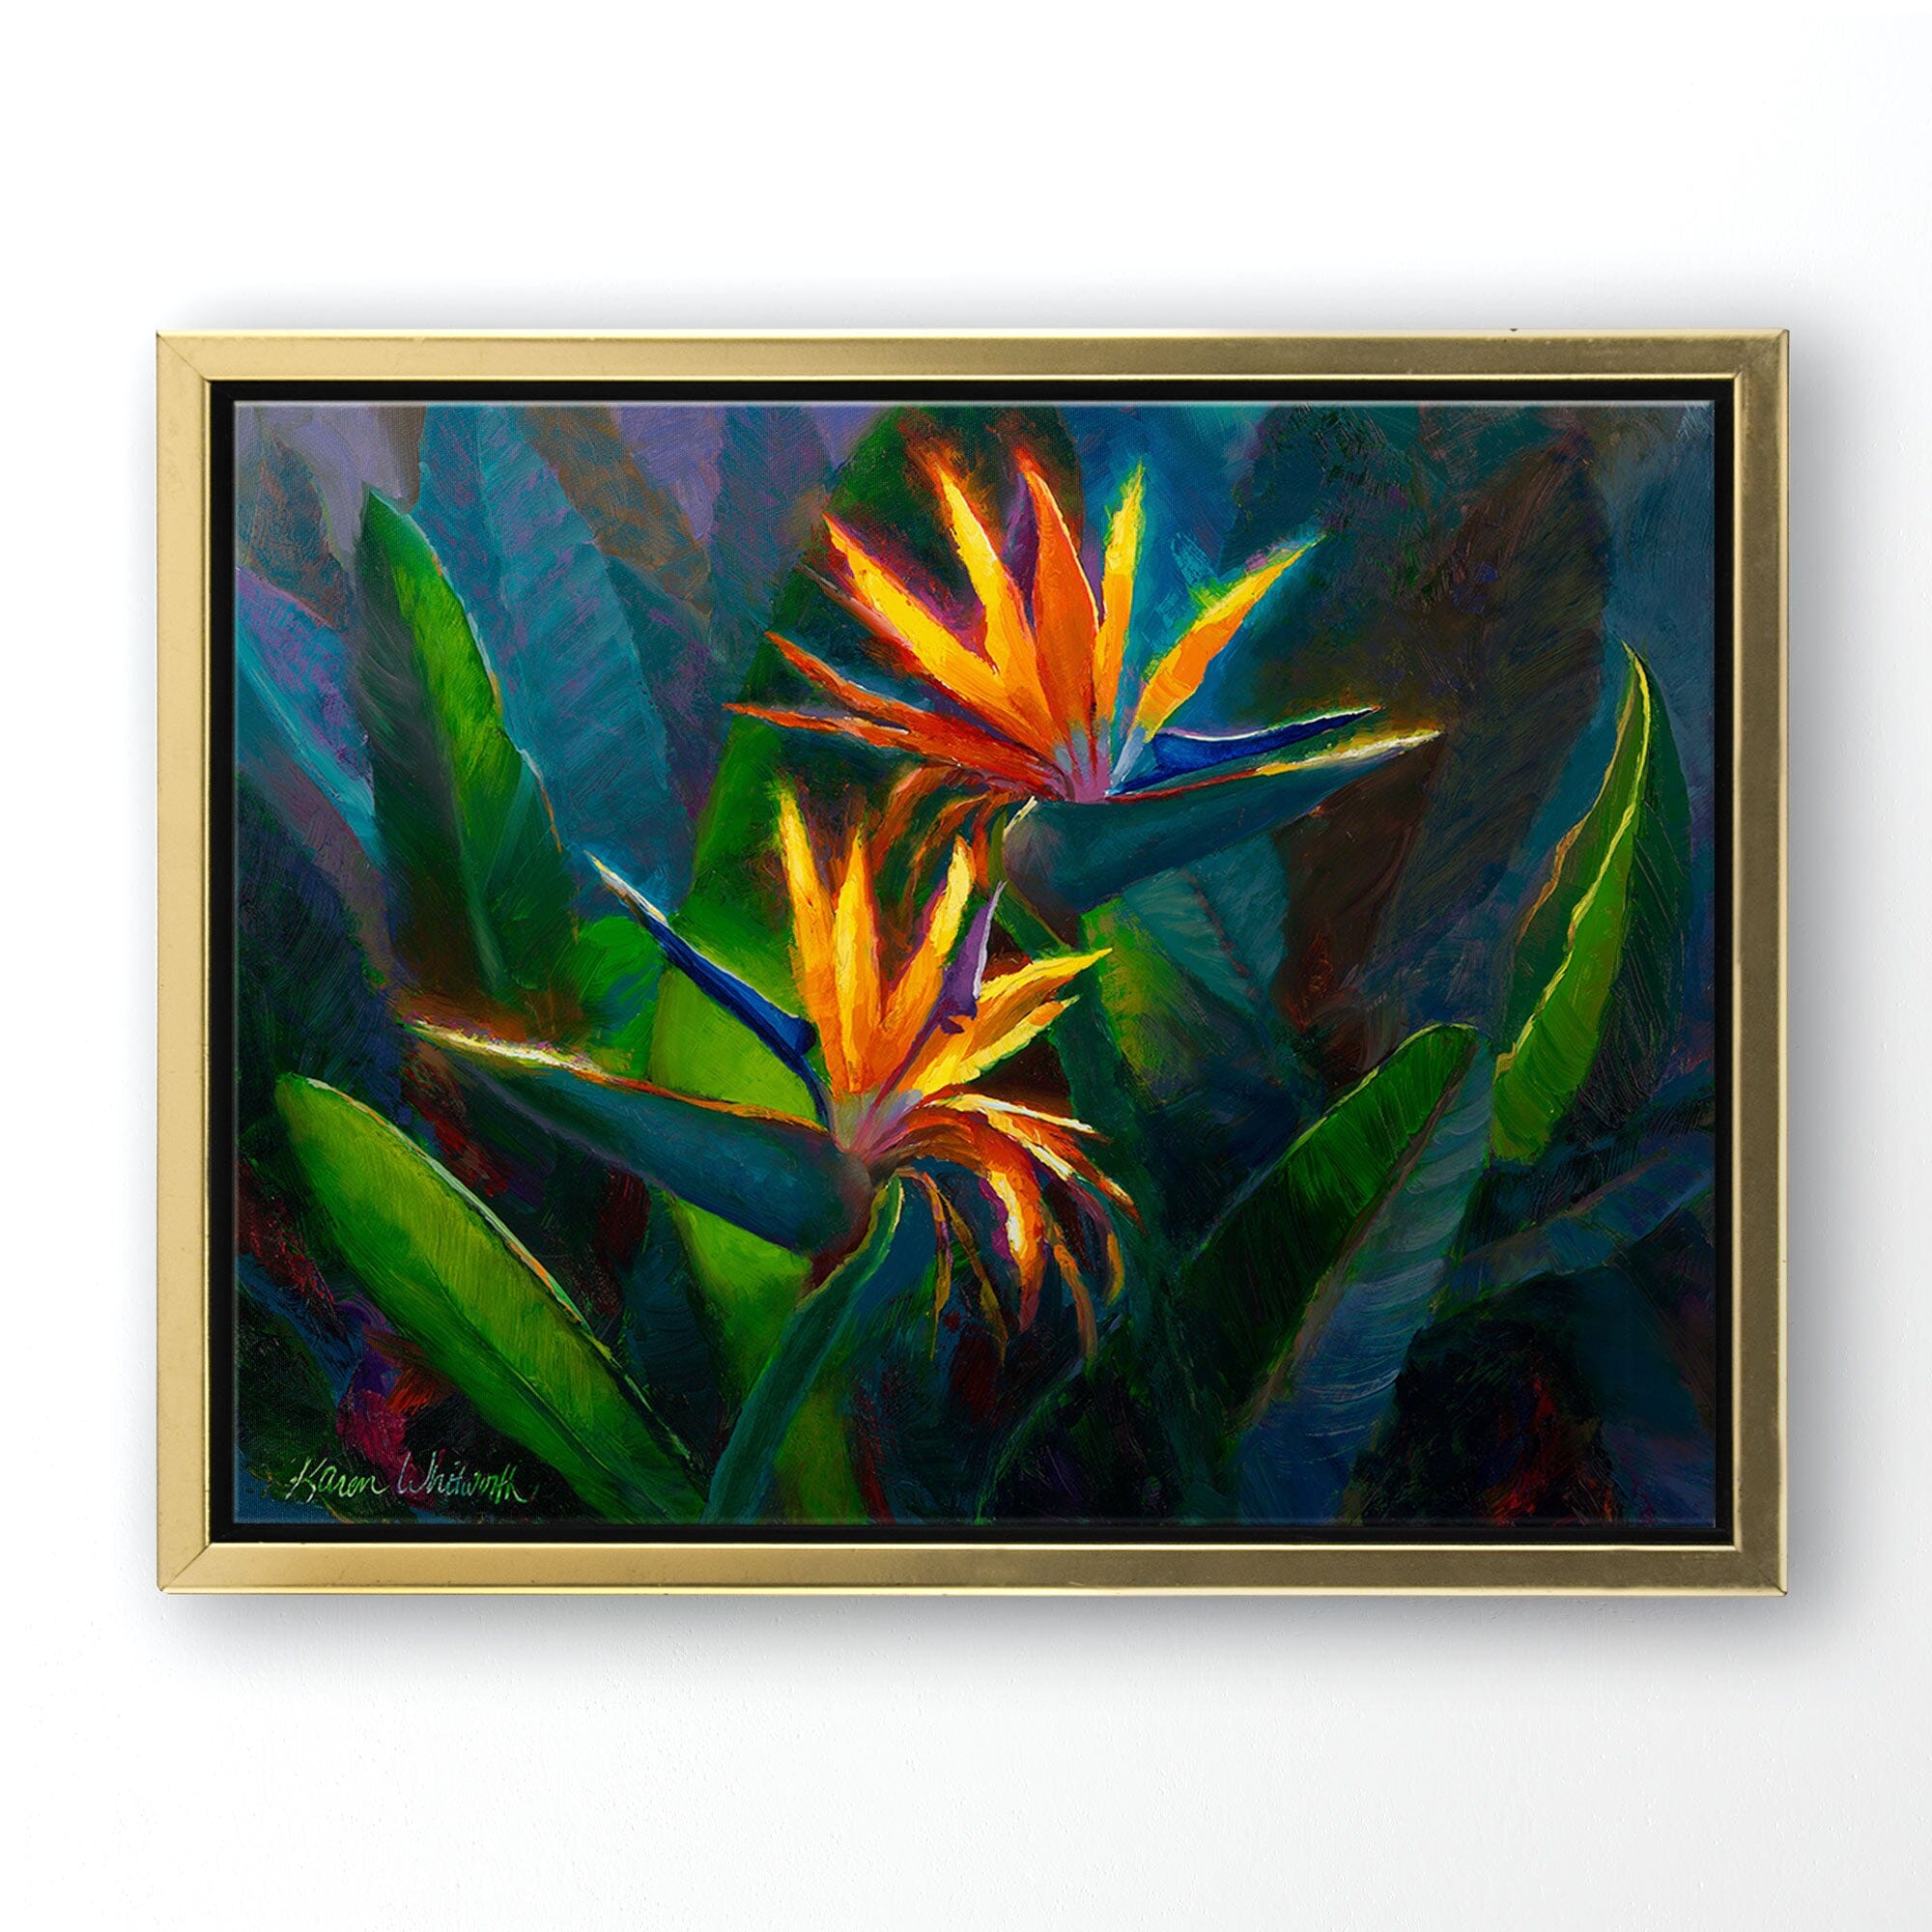 Hawaiian Flower Painting with tropical bird of paradise canvas art print by Hawaii artist Karen Whitworth. The artwork is framed in a Gold float frame and hanging on a white wall. 